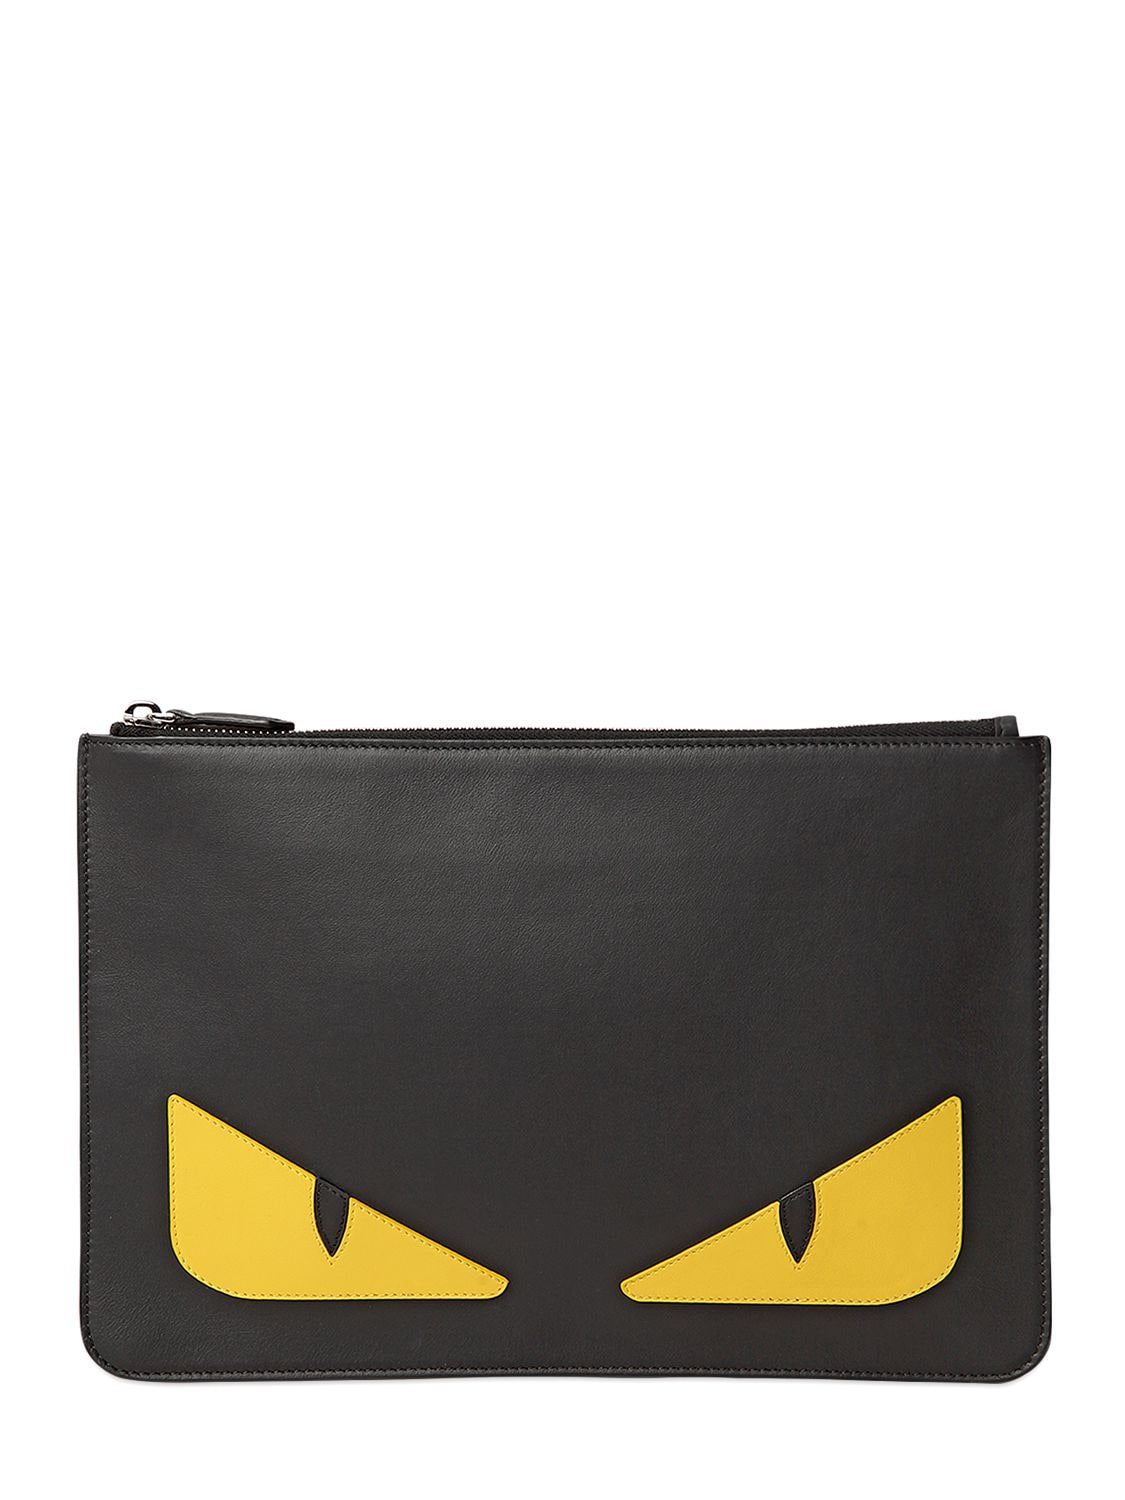 Fendi Monster Smooth Leather Pouch In Black/yellow